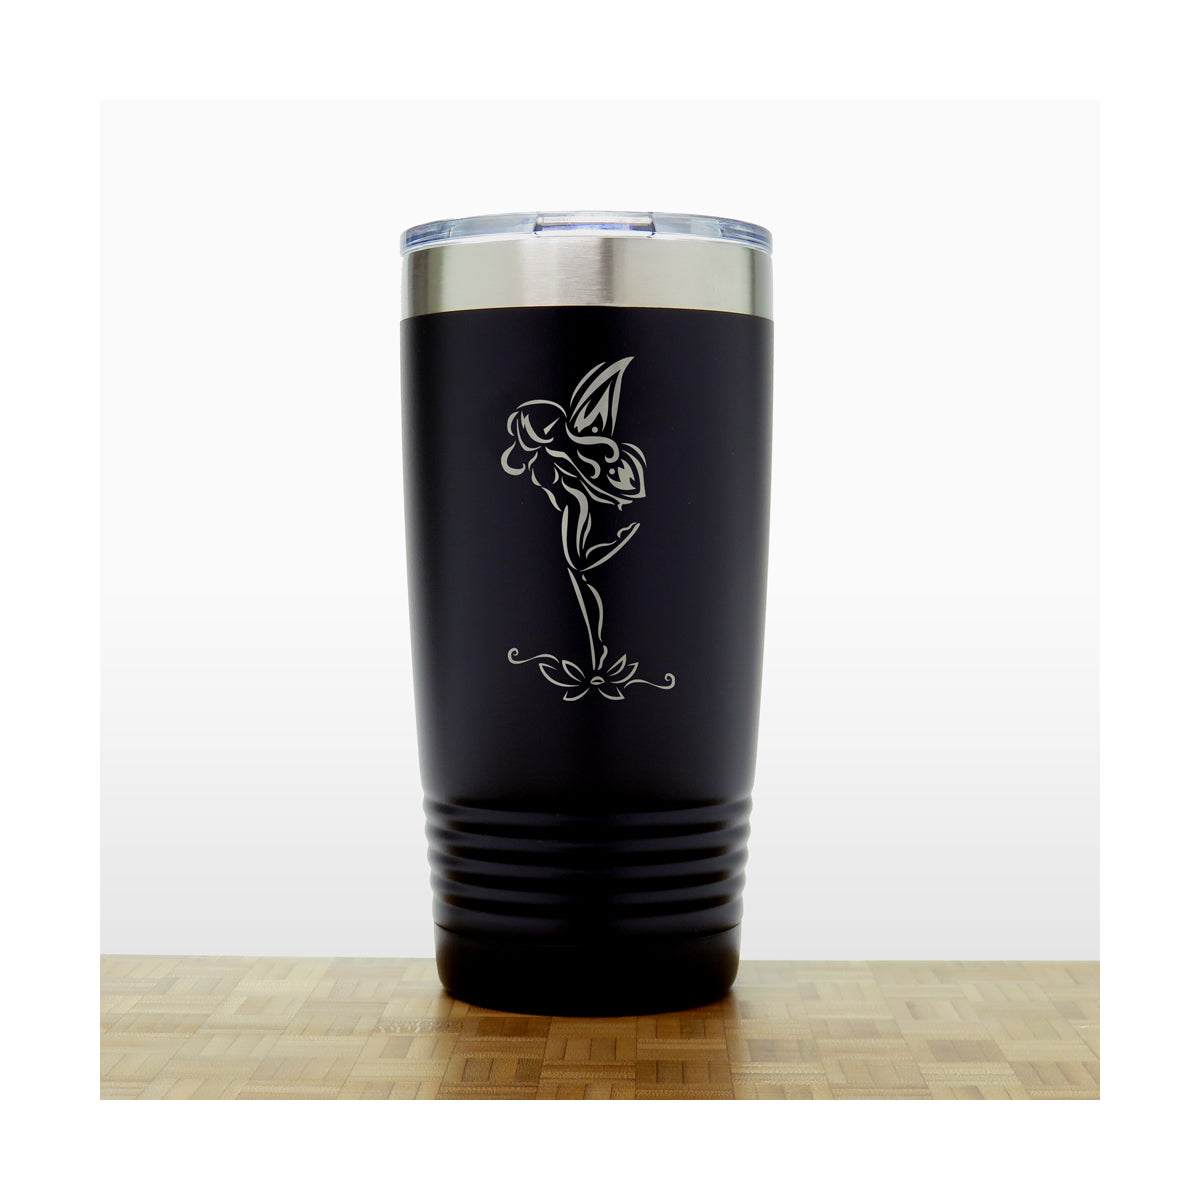 Black - Fairy 6 20 oz Insulated Tumbler - Copyright Hues in Glass